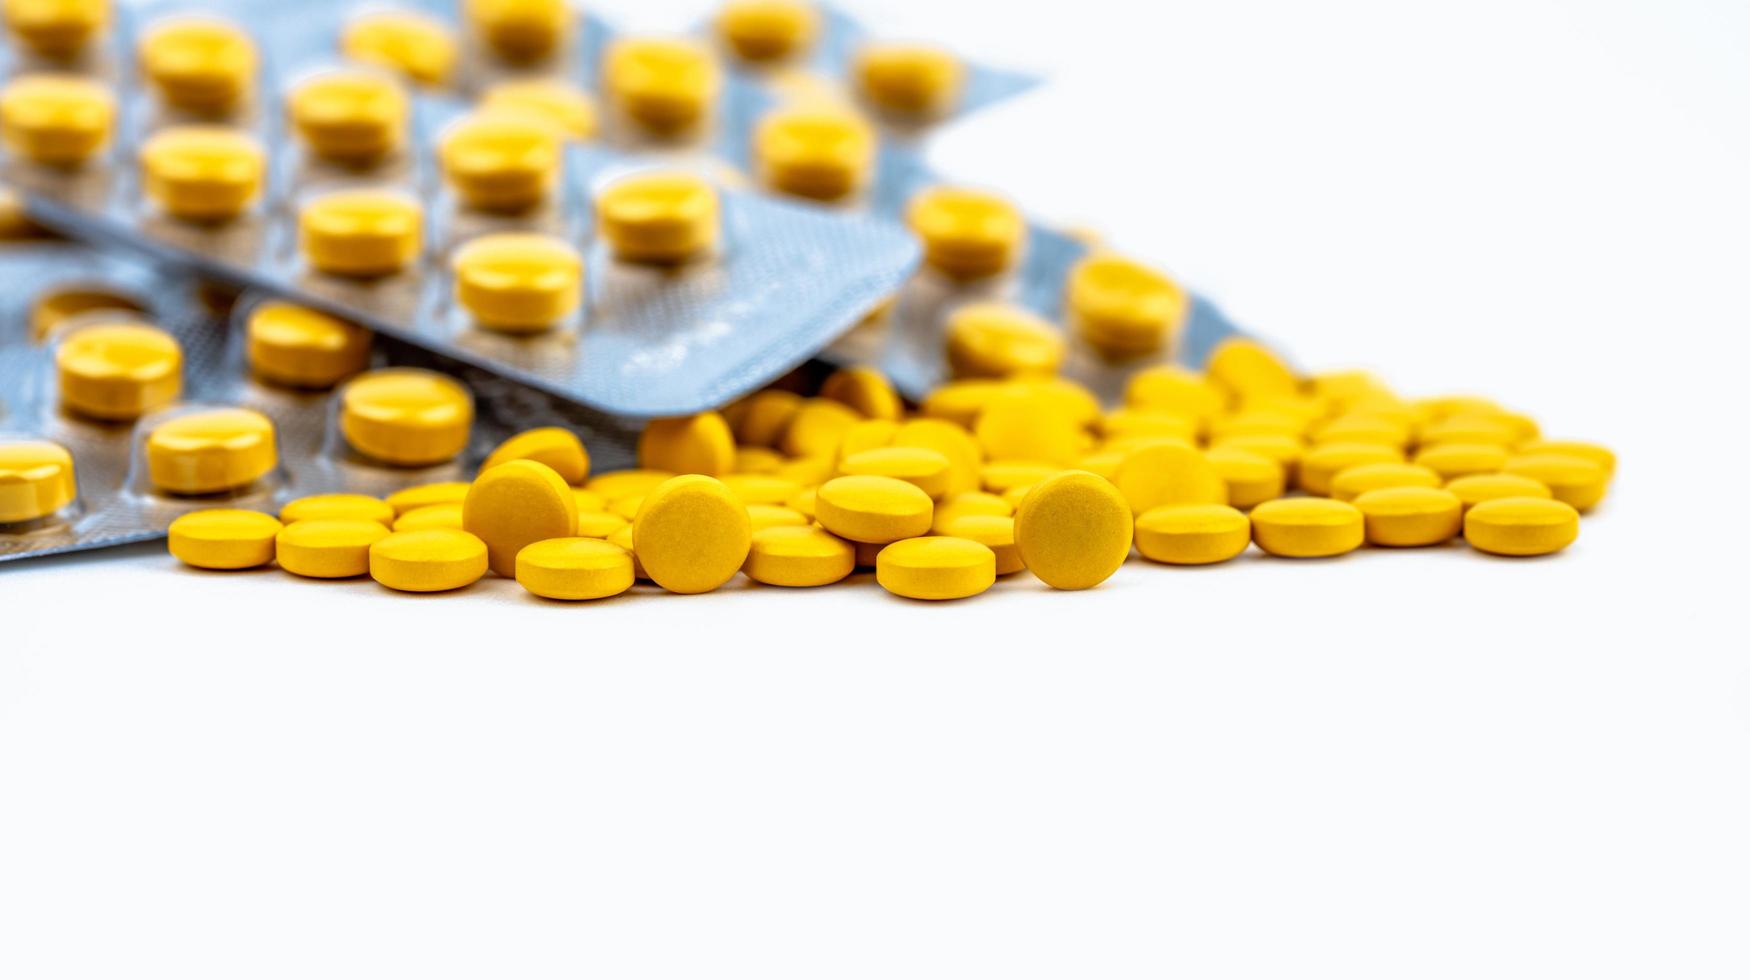 Yellow tablets pills and blister pack. Pharmacy drugstore background. Pharmaceutical industry. Pharmaceutics concept. Selective focus on small yellow tablets pills. Healthcare and medicine concept. photo